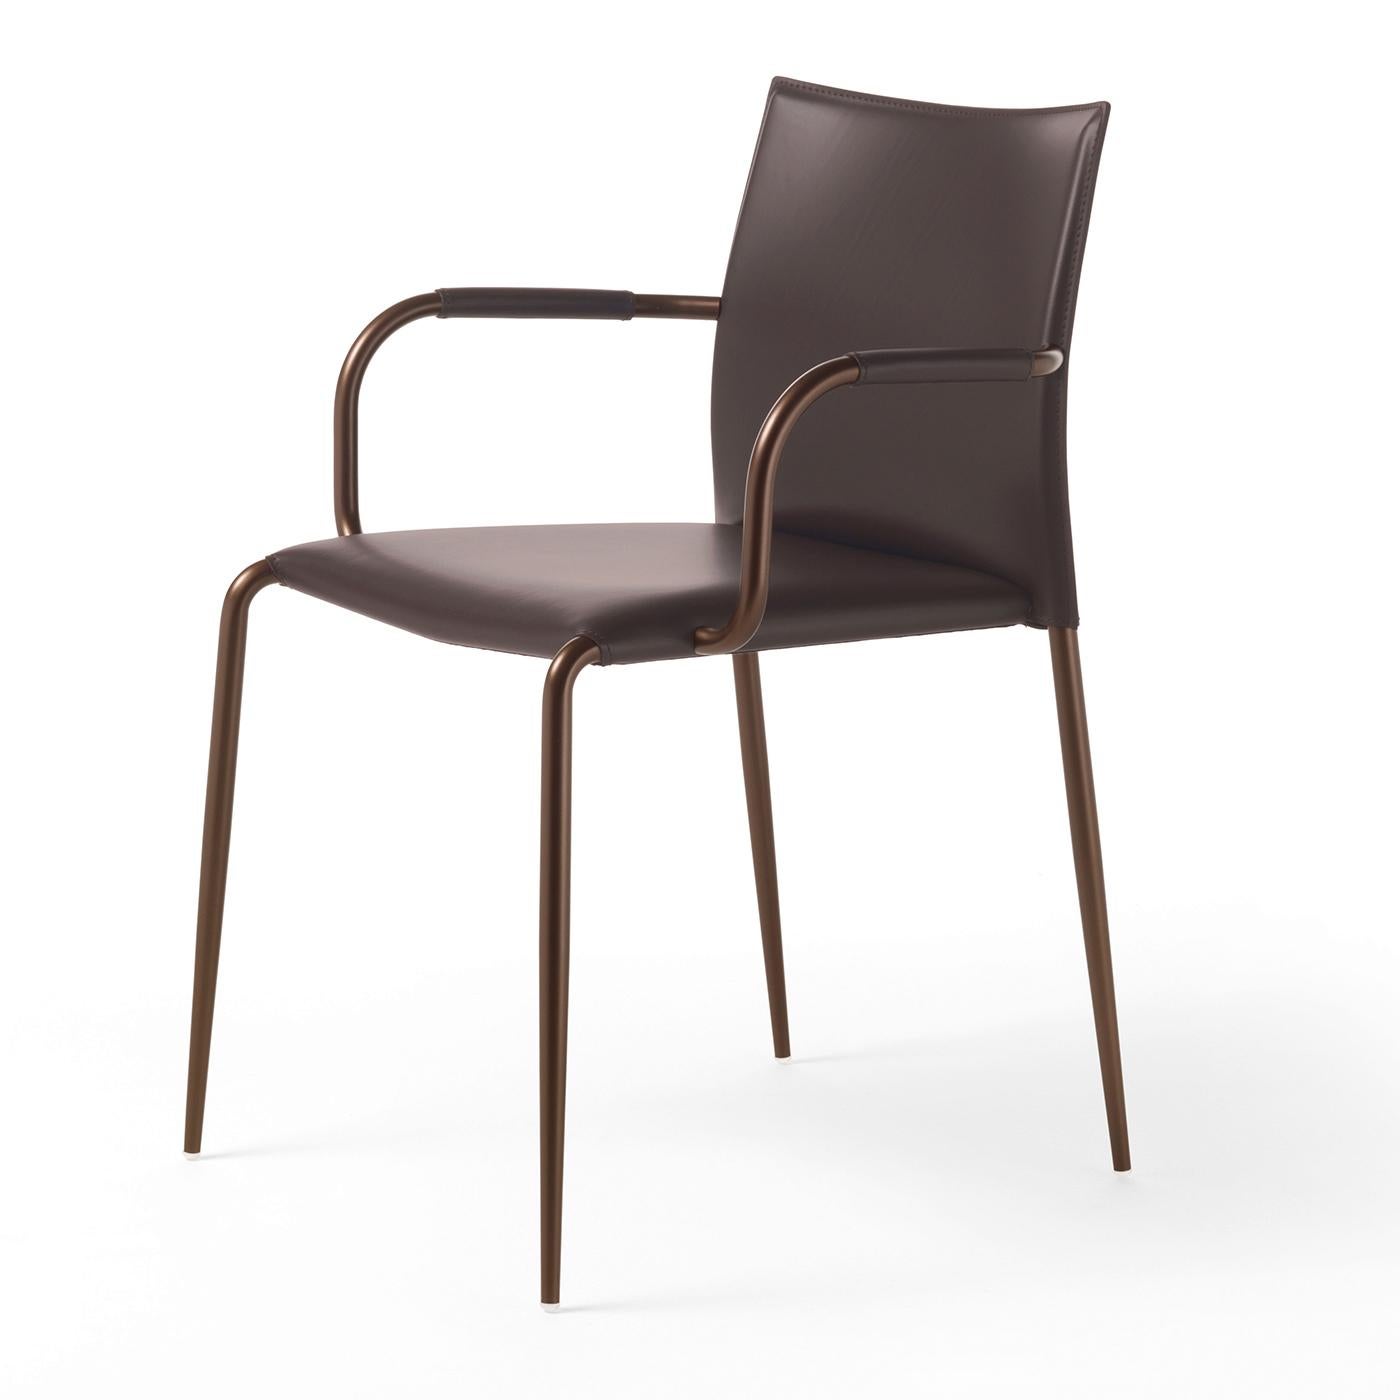 This armchair is characterized by minimalist, simple lines synonymous with great elegance. It's stackable and suitable for all contexts, from residential to hospitality. Its metal, tubular structure is painted bronze, while its seat, arms and back